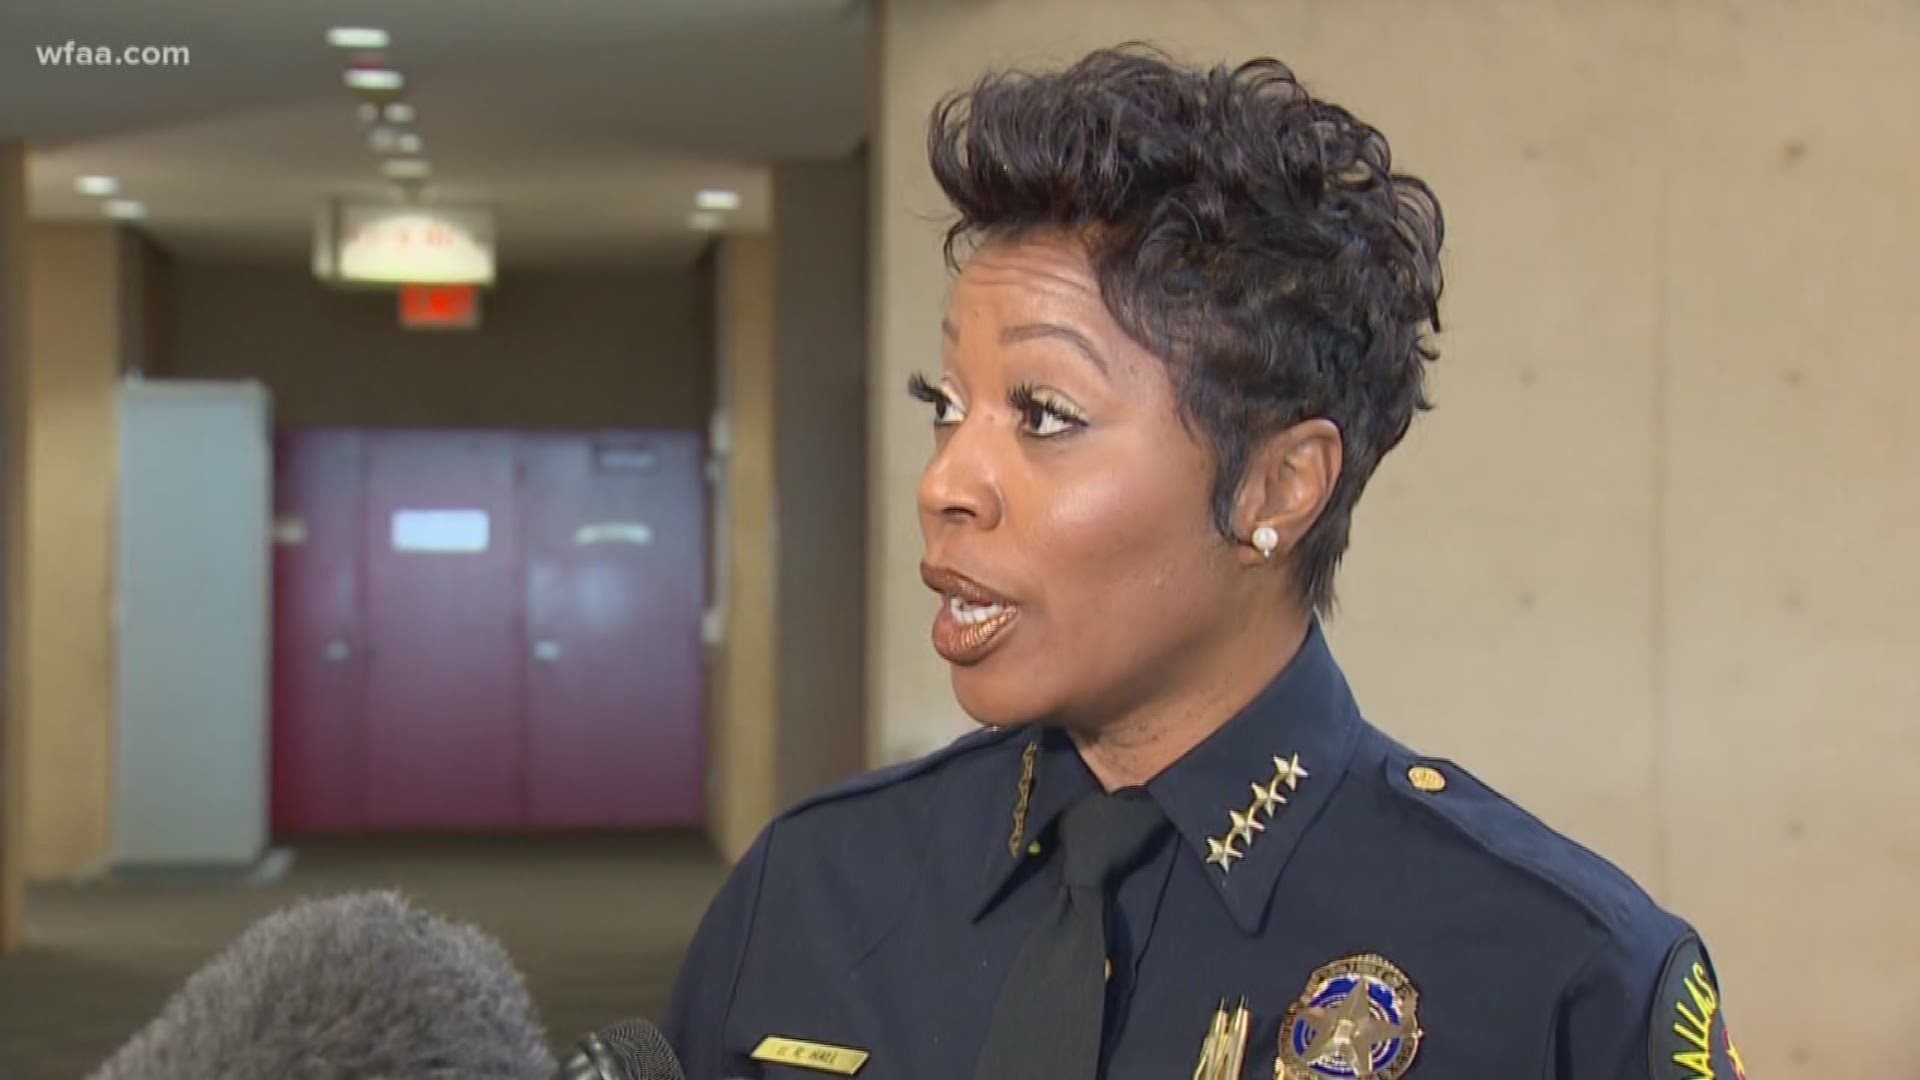 Dallas police Chief U. Reneé Hall defended her plans and her leadership as the council questions her about the increase in crime.